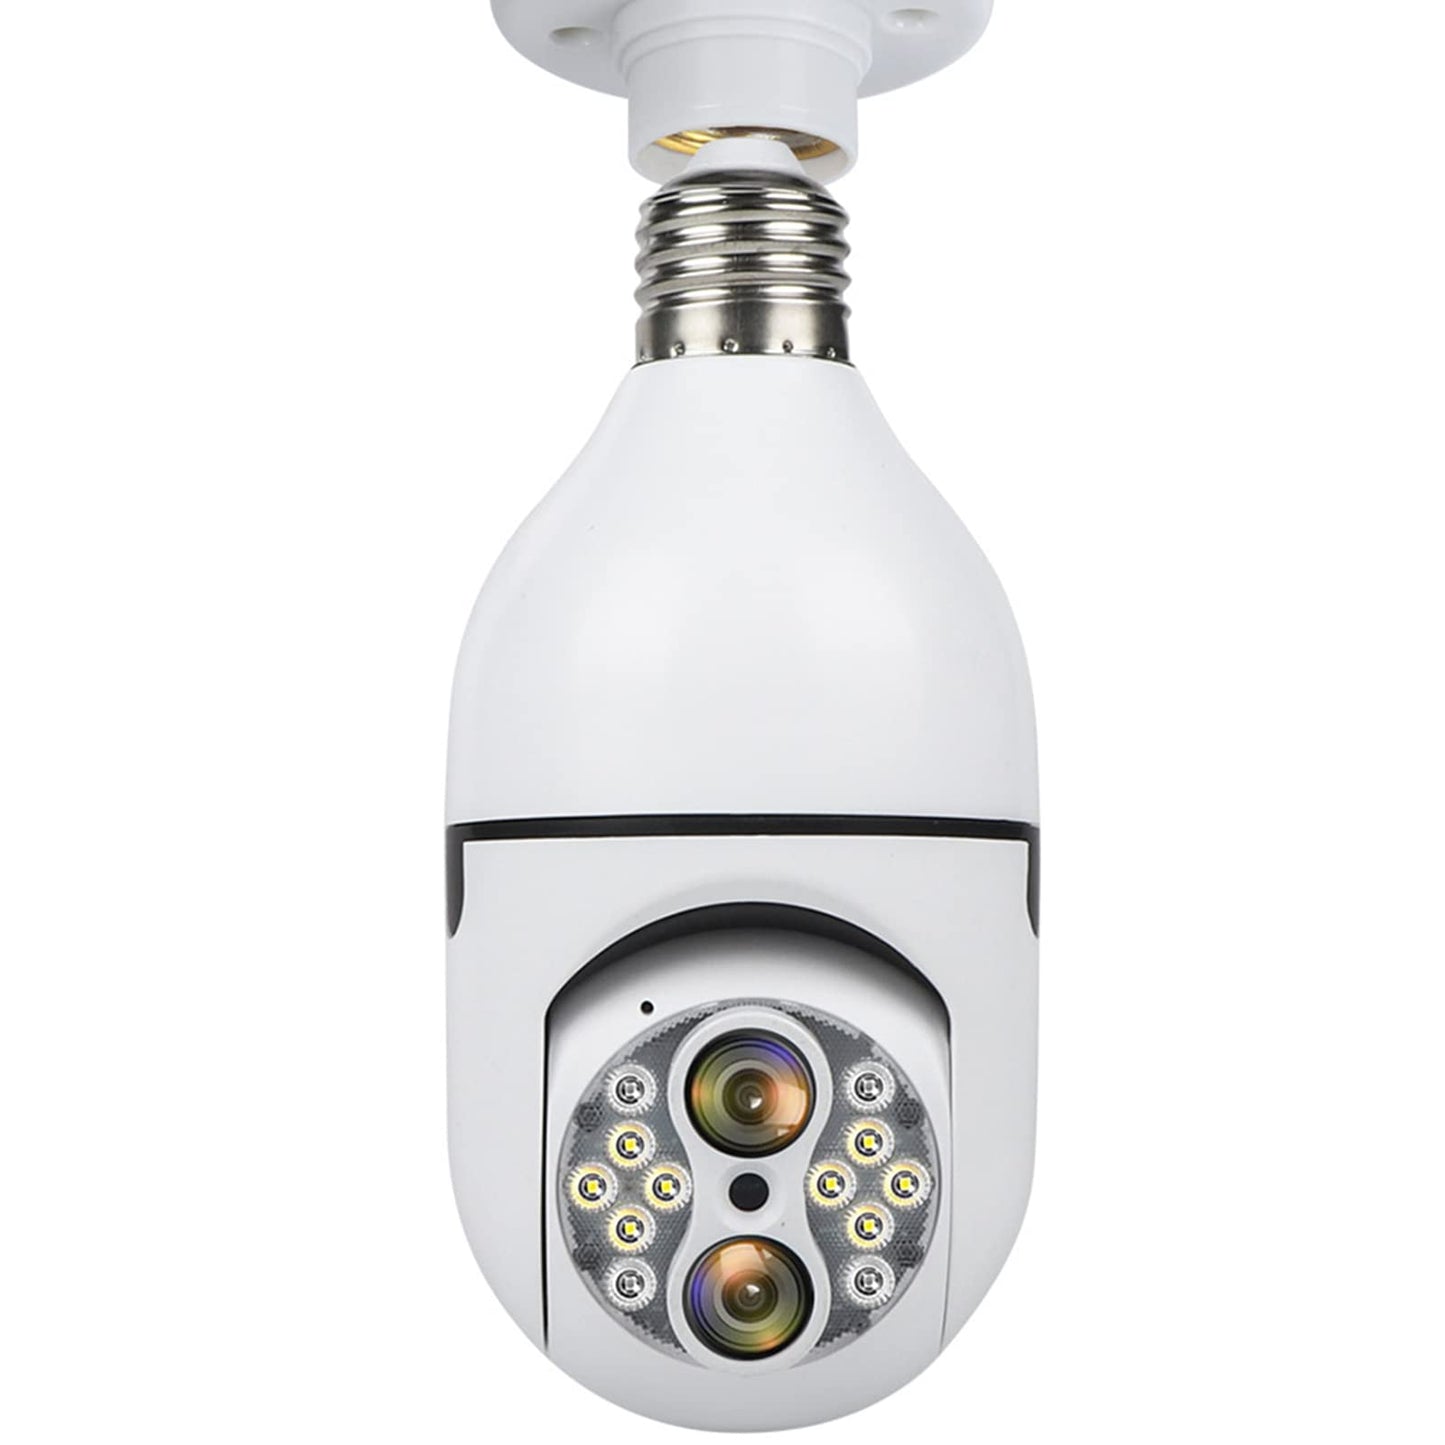 4MP 10X Zoom Light Bulb Security Camera - SOVMIKU Wireless IP Camera with 360° PTZ Panoramic View, Full Color Night Vision, Two Way Audio & Motion Detection Alarm